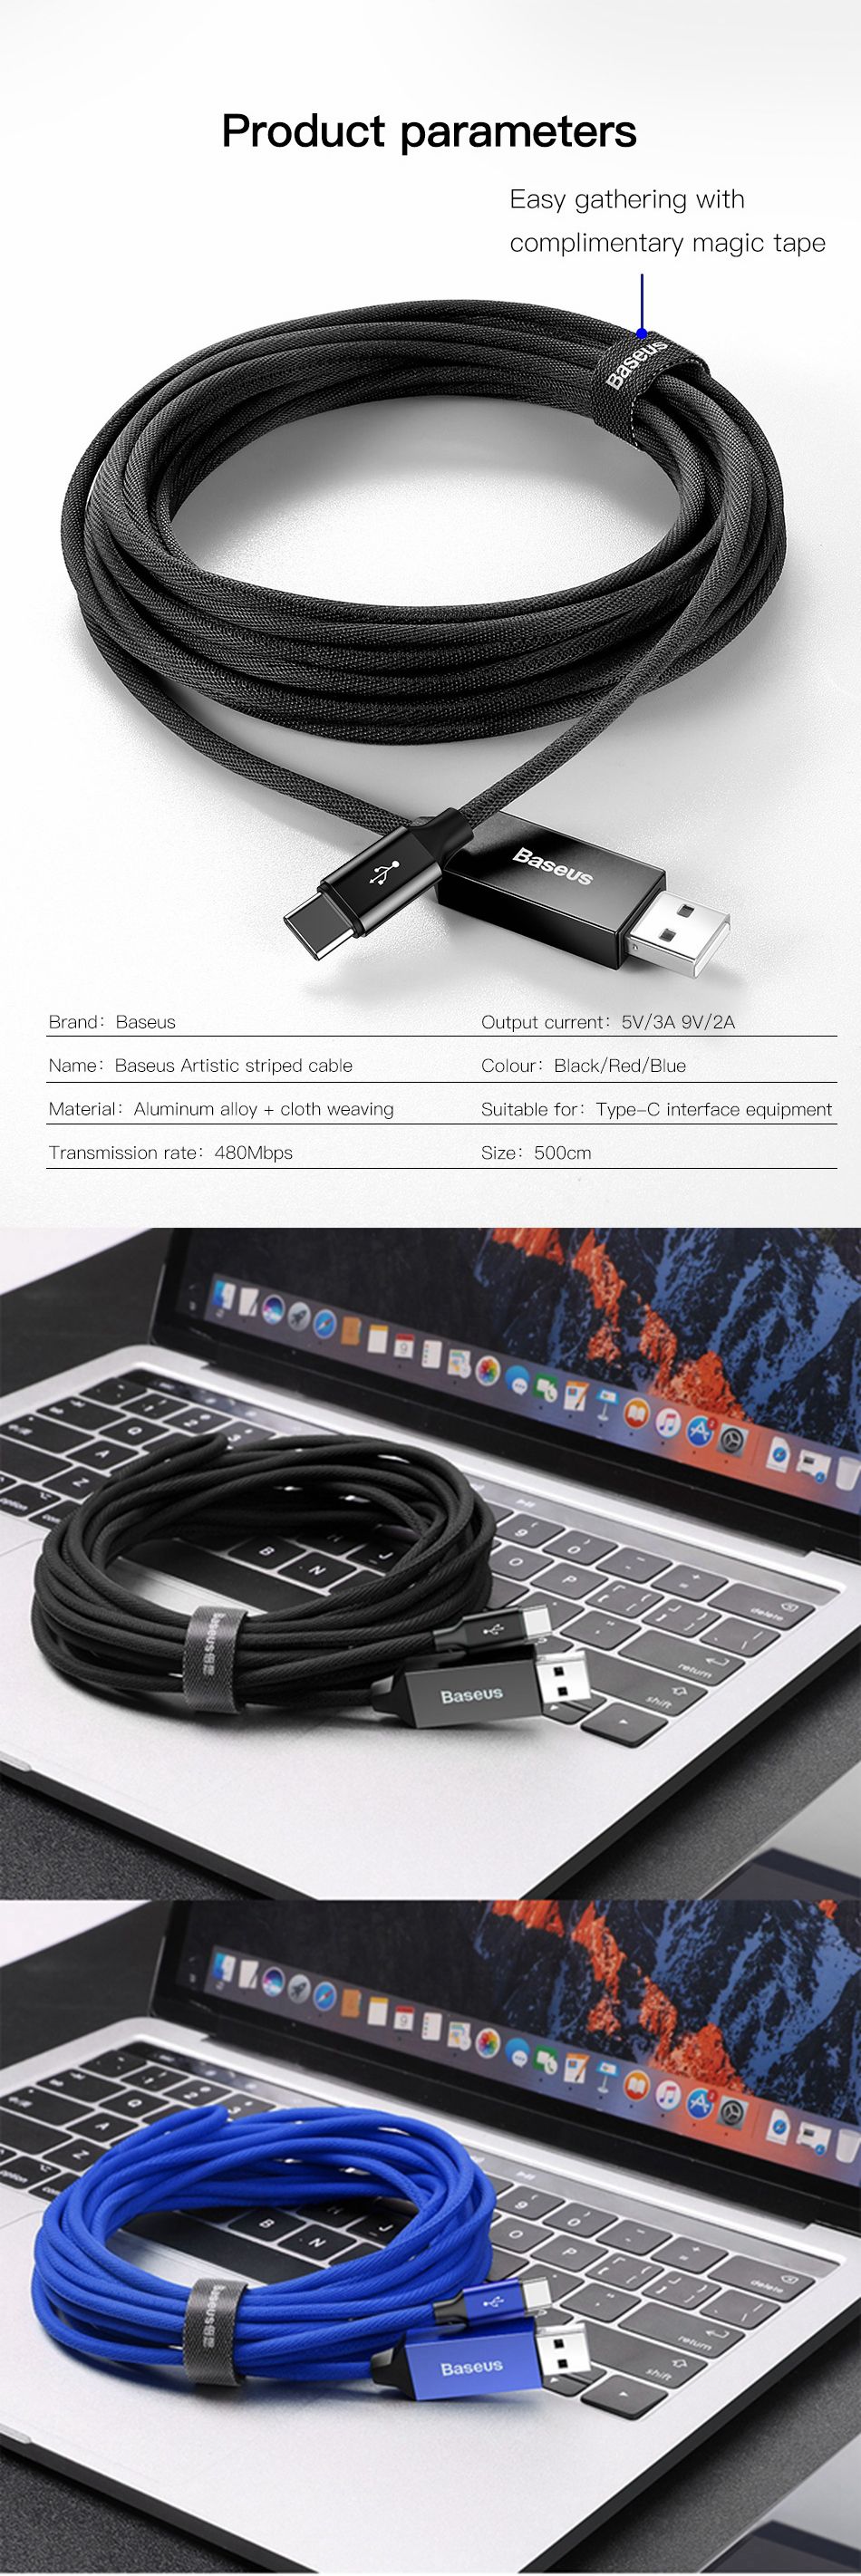 Baseus-5M-QC30-USB-Type-C-Fast-Charging-Data-Long-Cable-For-Oneplus-6T-Xiaomi-Mi8-Pocophone-F1-S9-1396627